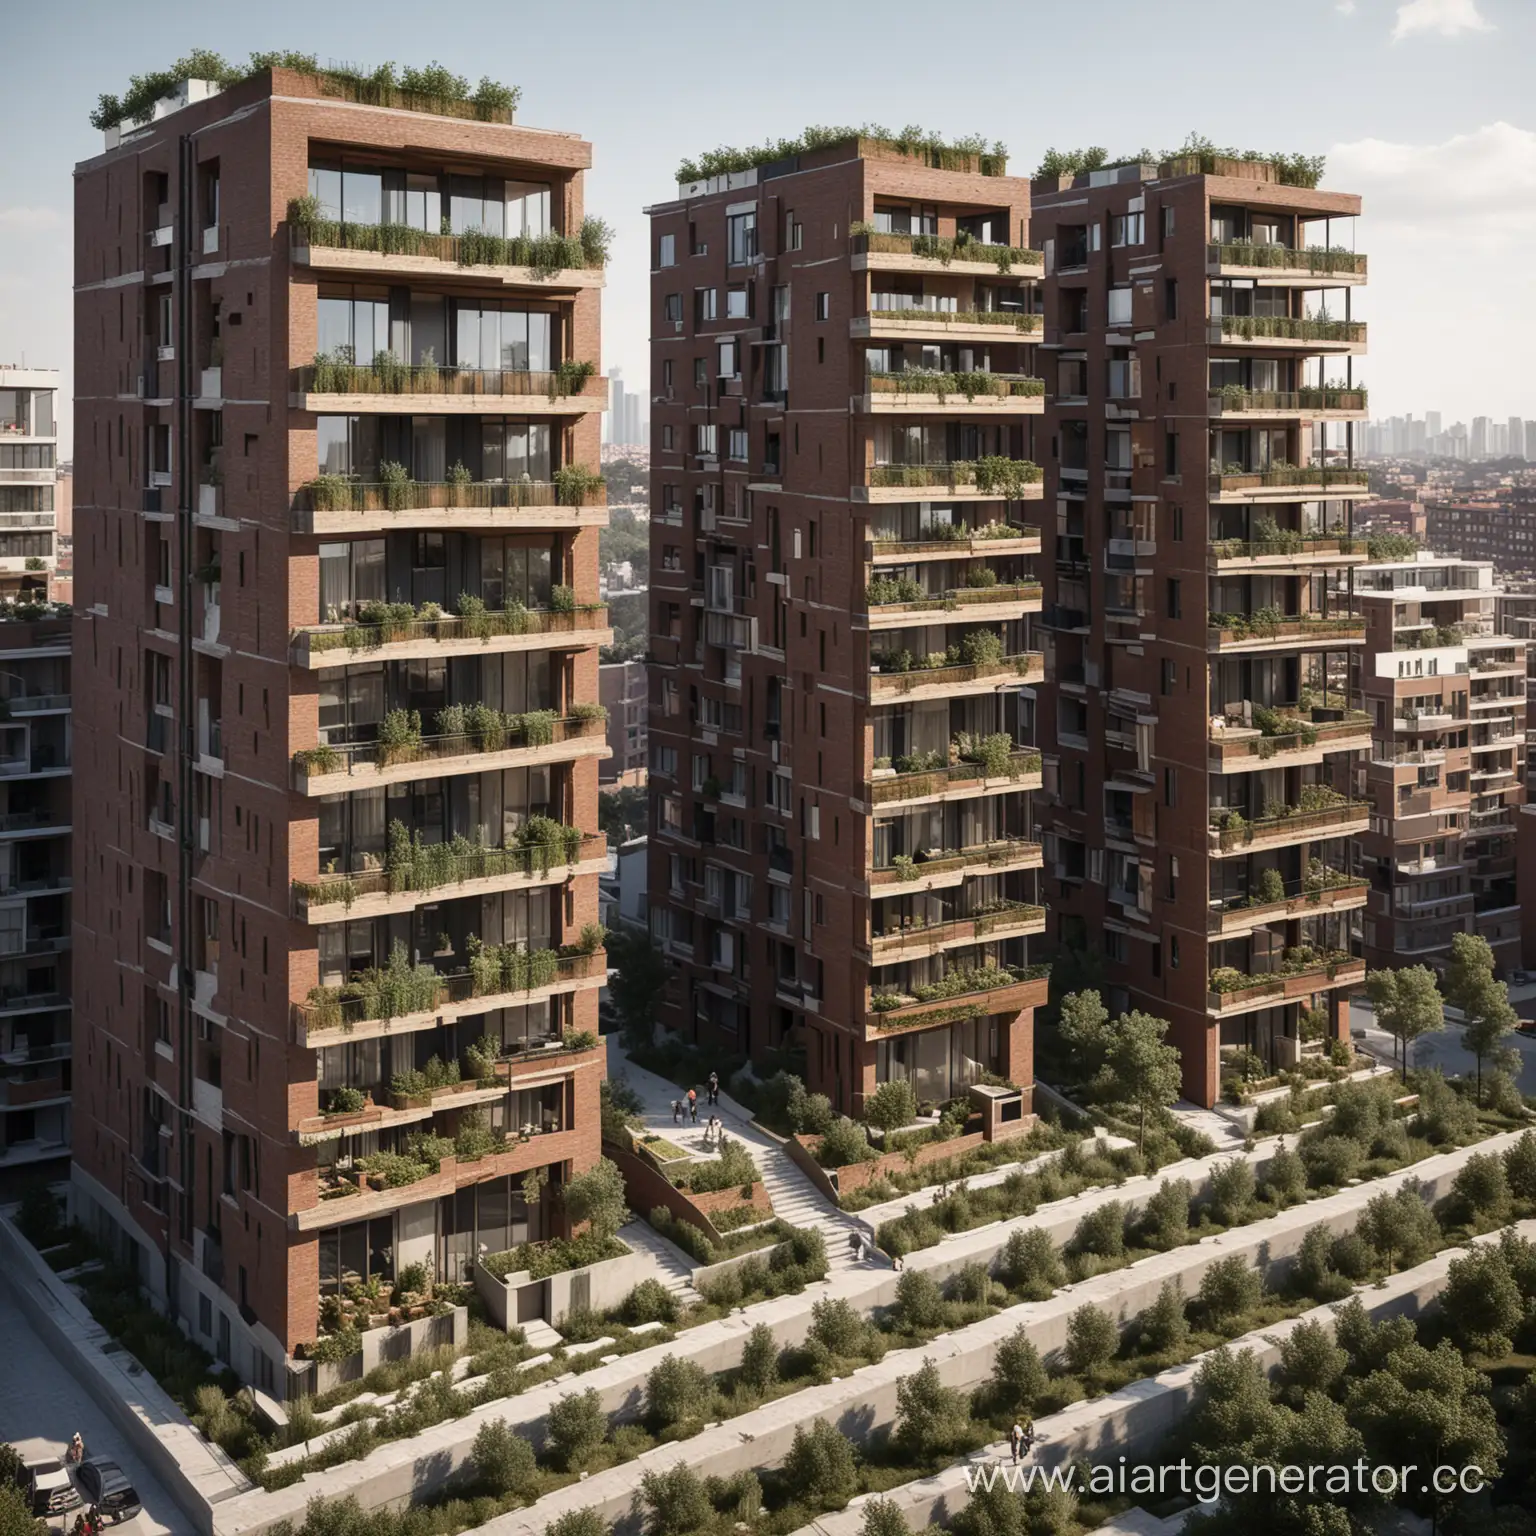 Modern-Urban-Residential-Complex-with-Communal-Spaces-and-Greenery